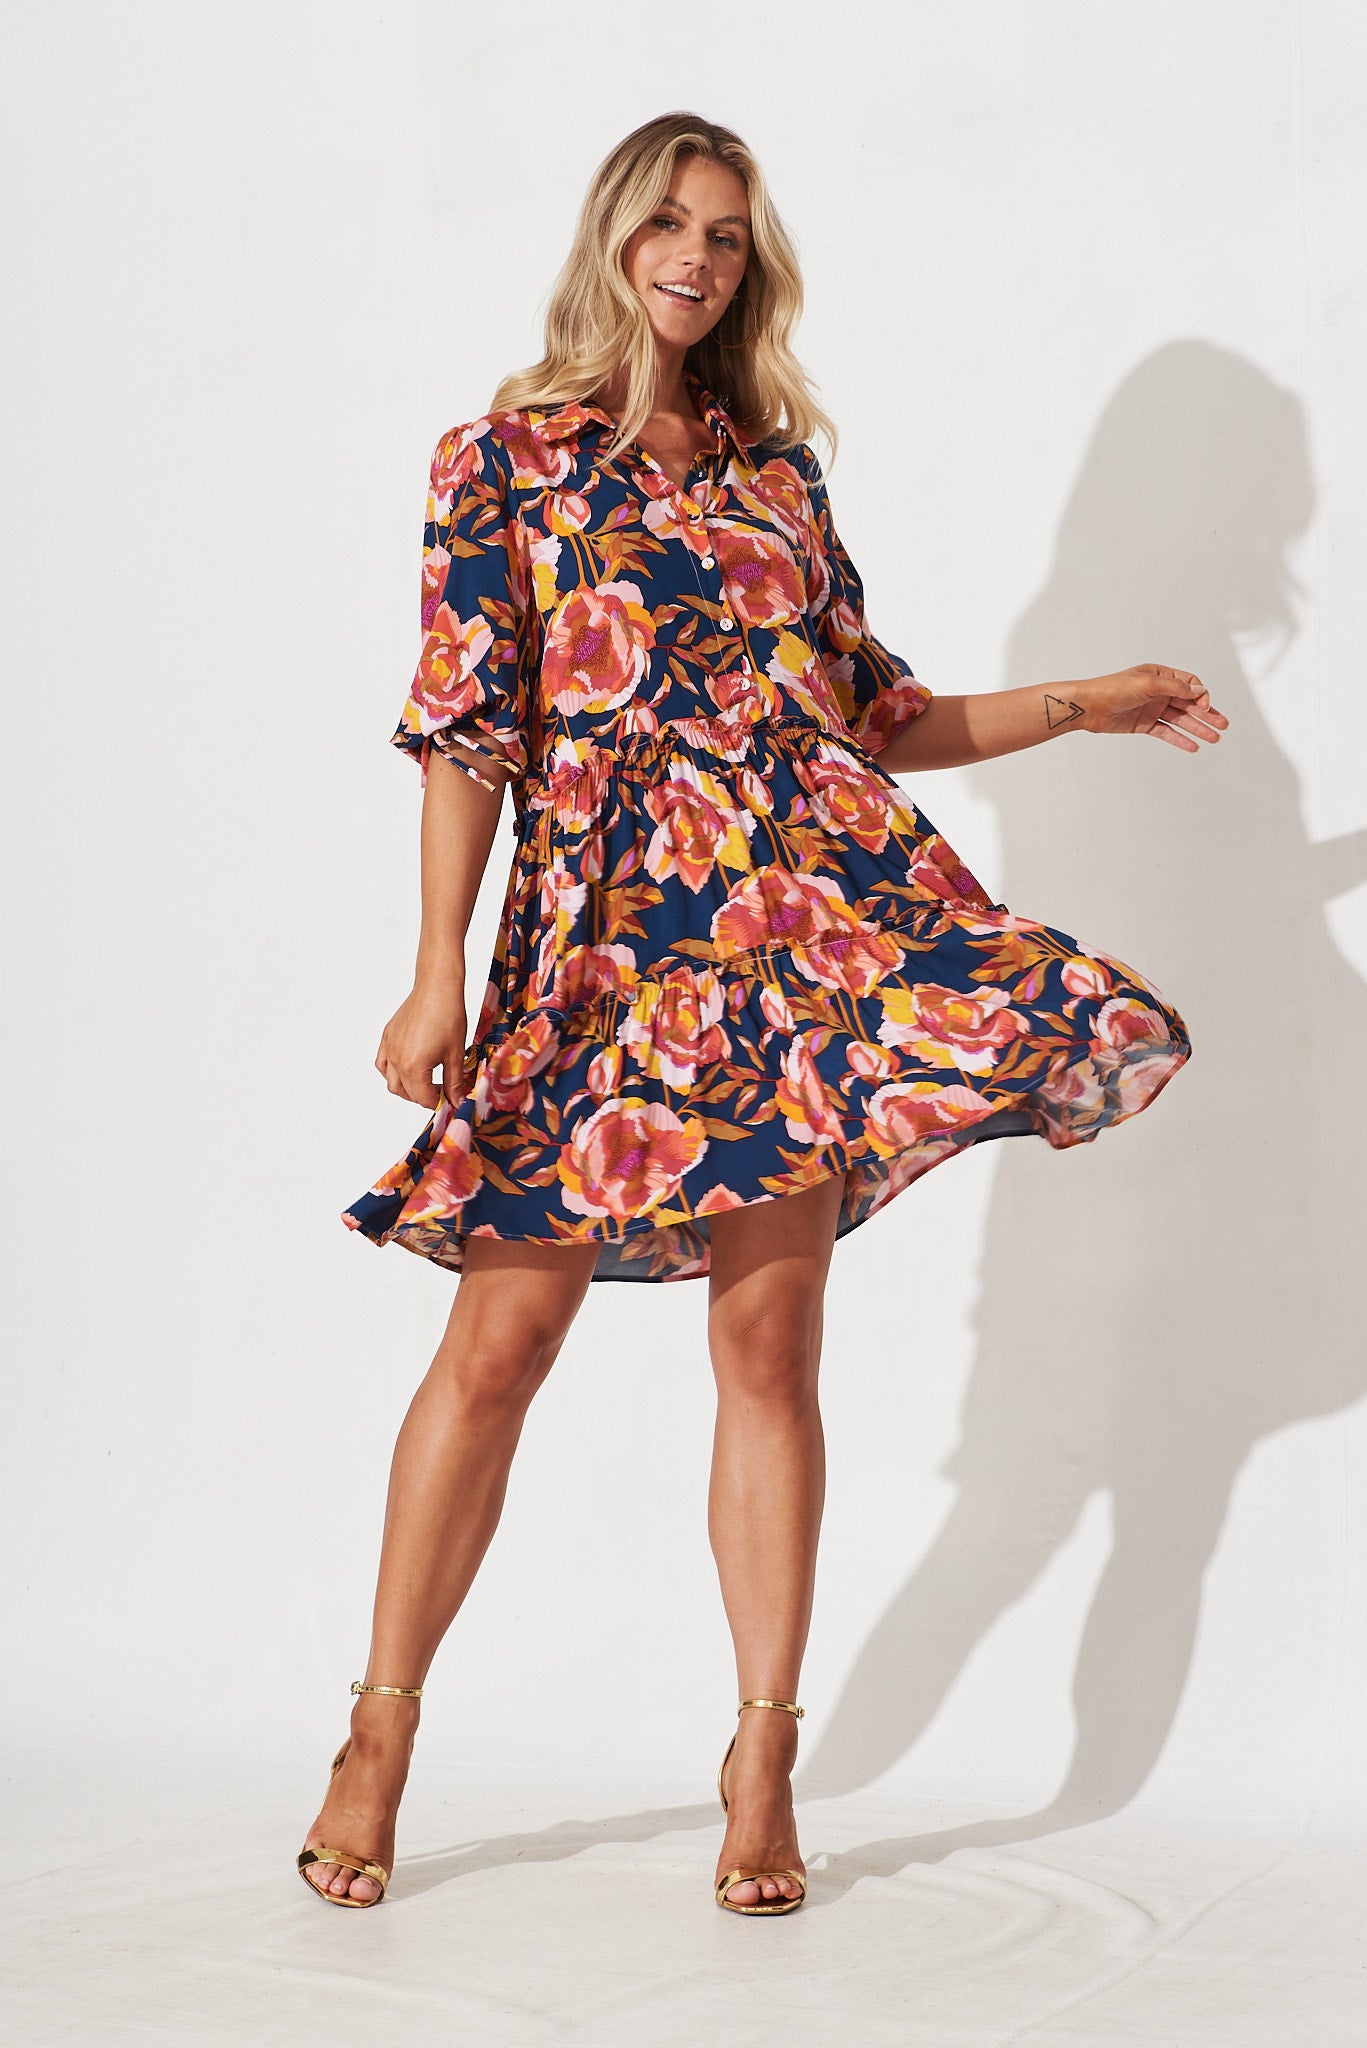 Bega Dress In Navy With Red Floral - full length